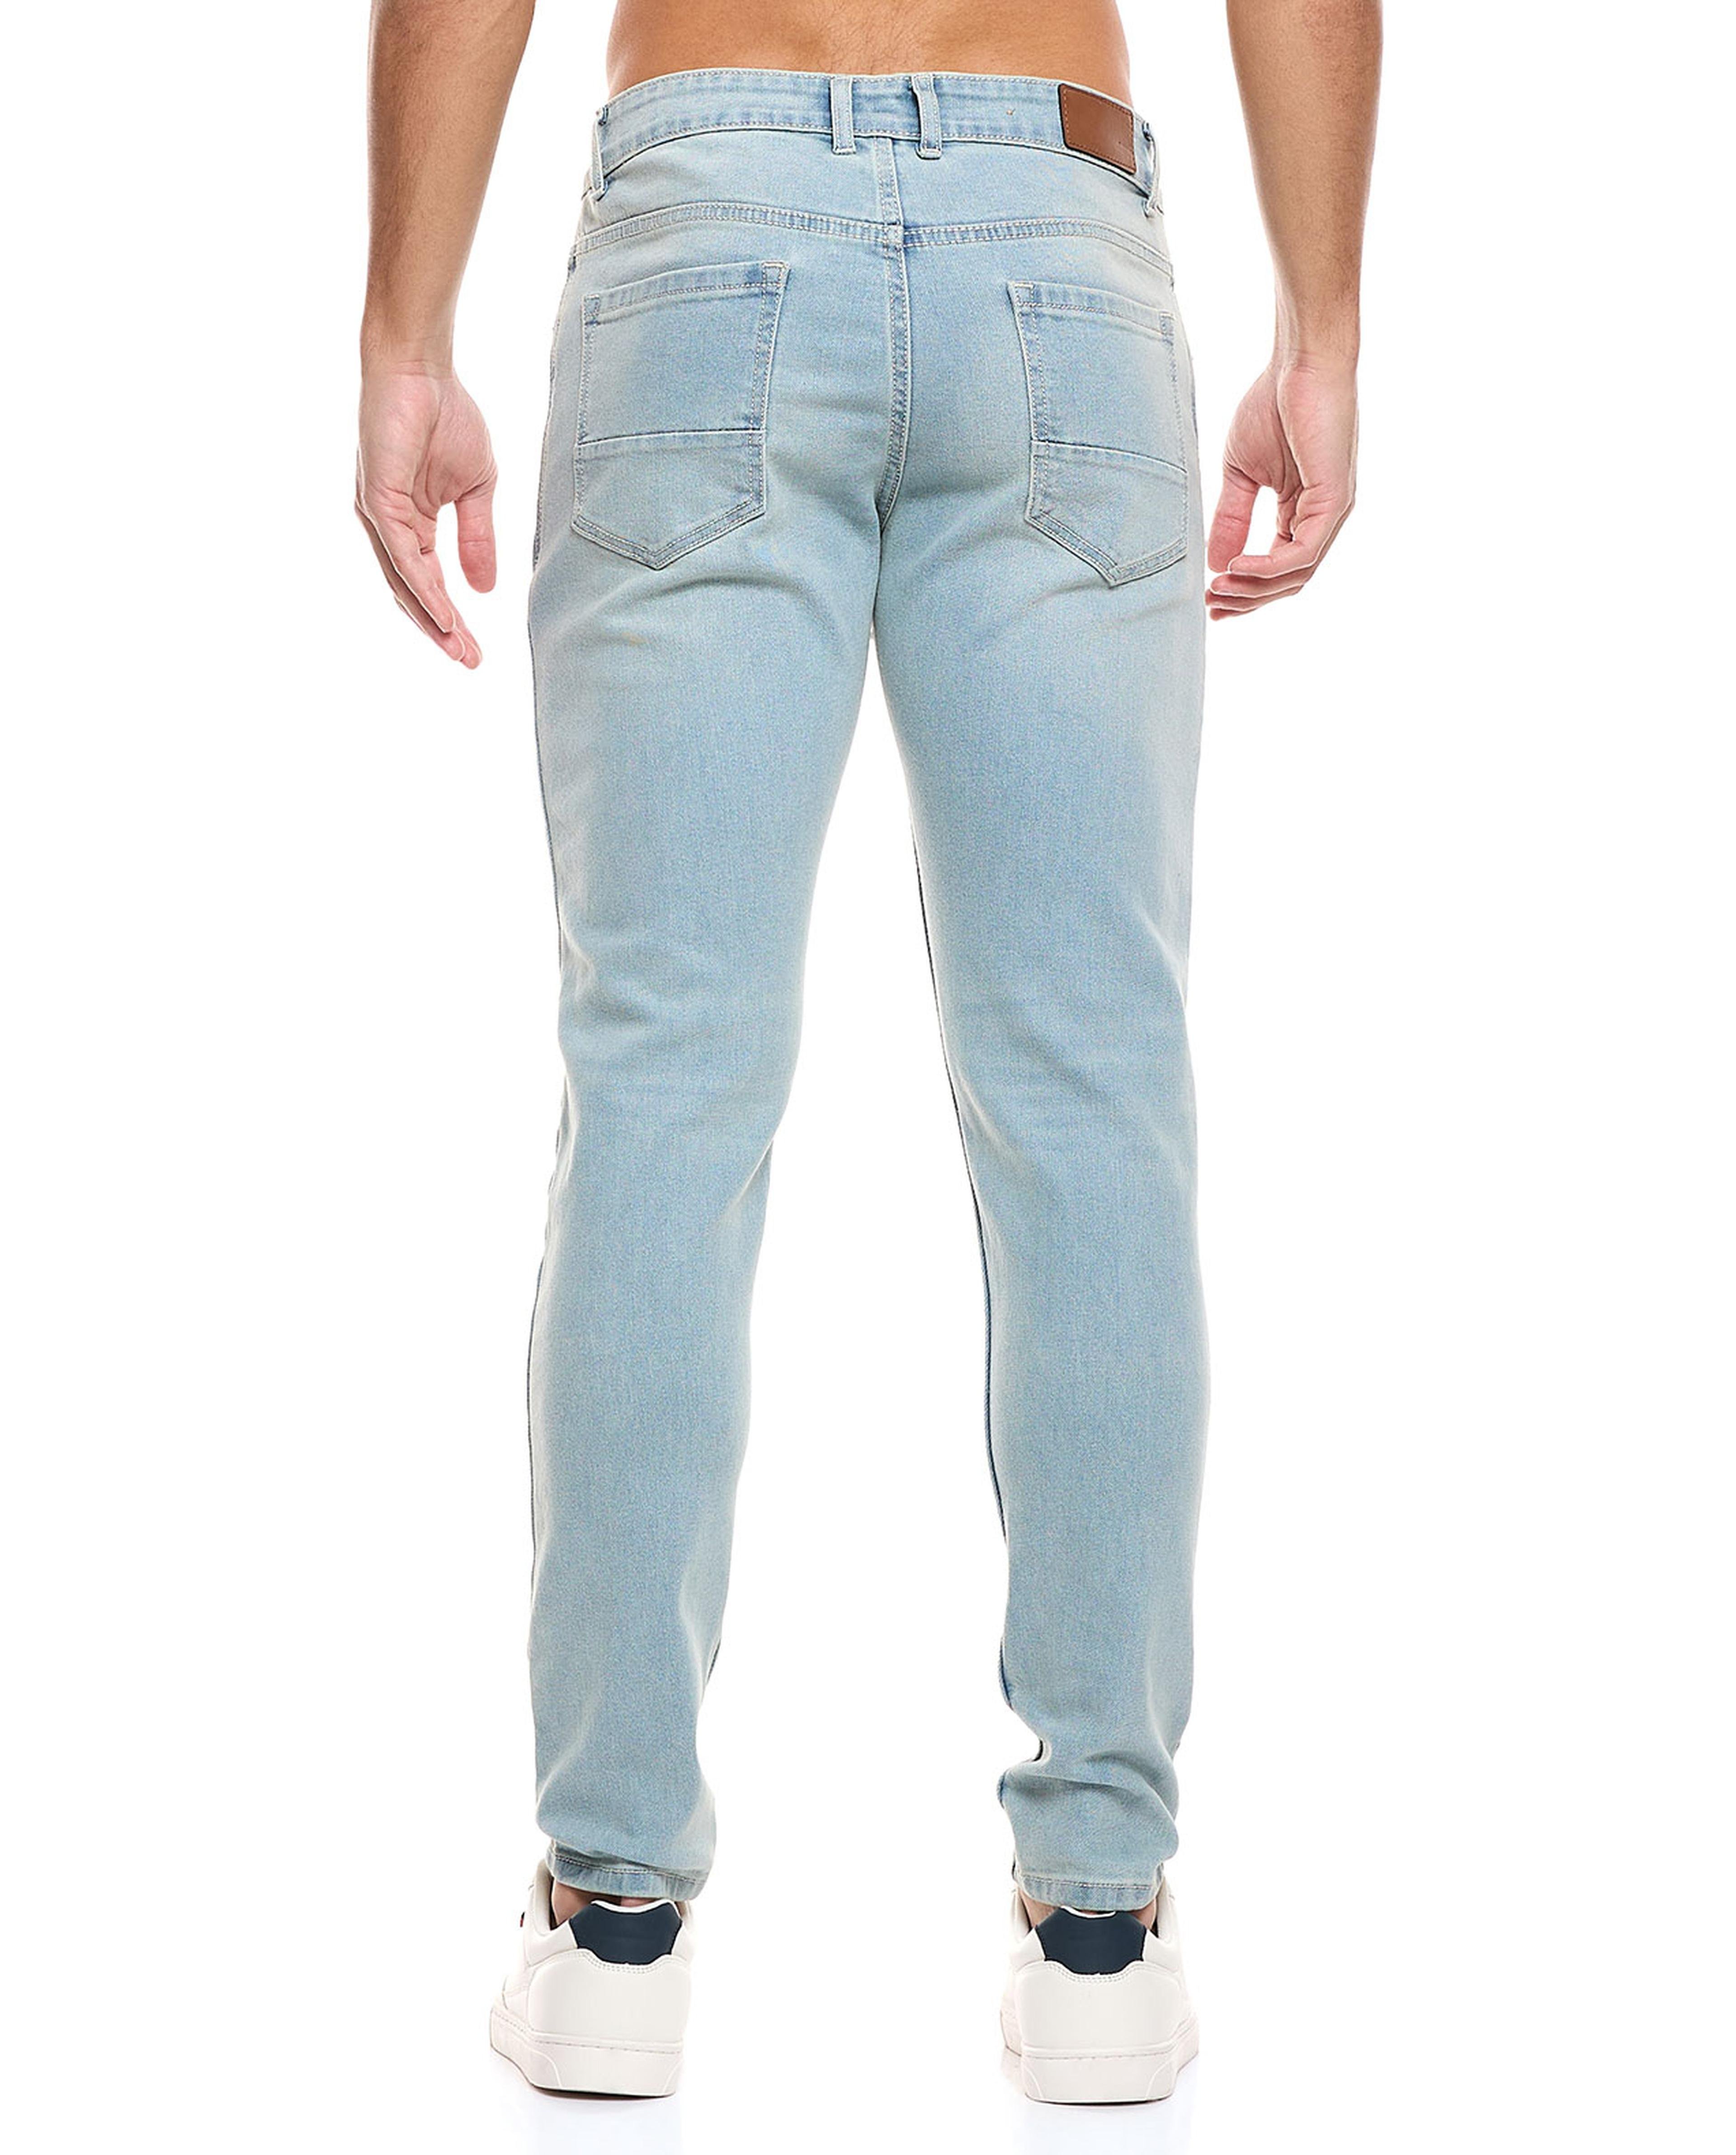 Faded Slim Fit Jeans with button Closure